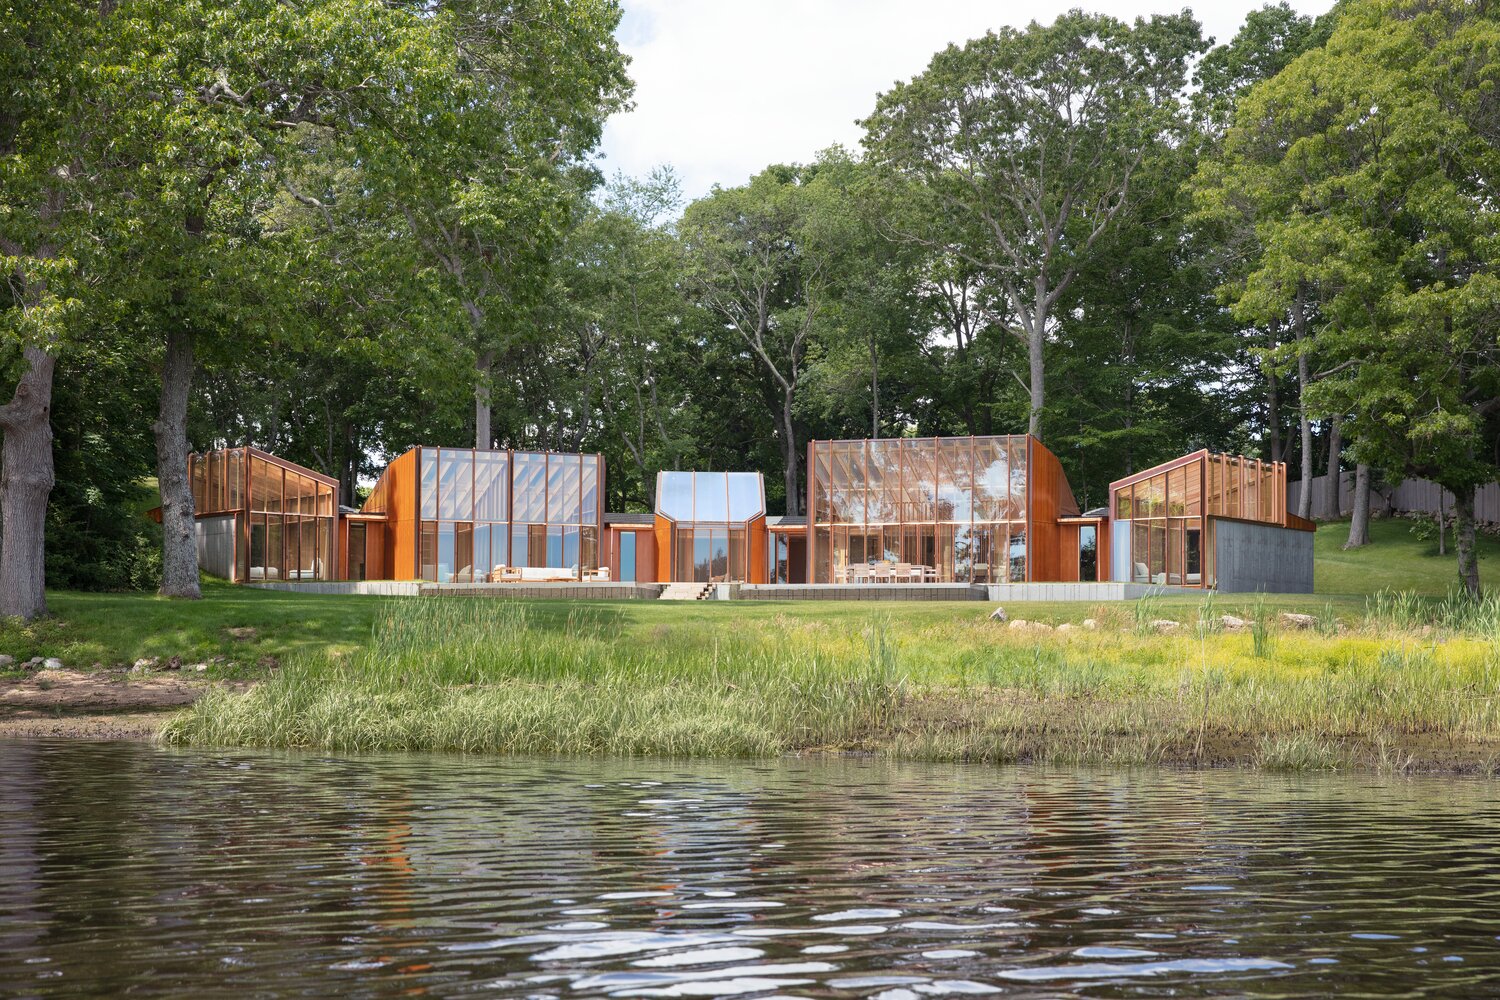 “The River House,” in Westport, Mass., as seen from the east branch of the Westport River. Designed and owned by architect Jonathan Levi, the house is a marvel of innovation, showcasing new ways of building and new ways of thinking about residential construction.